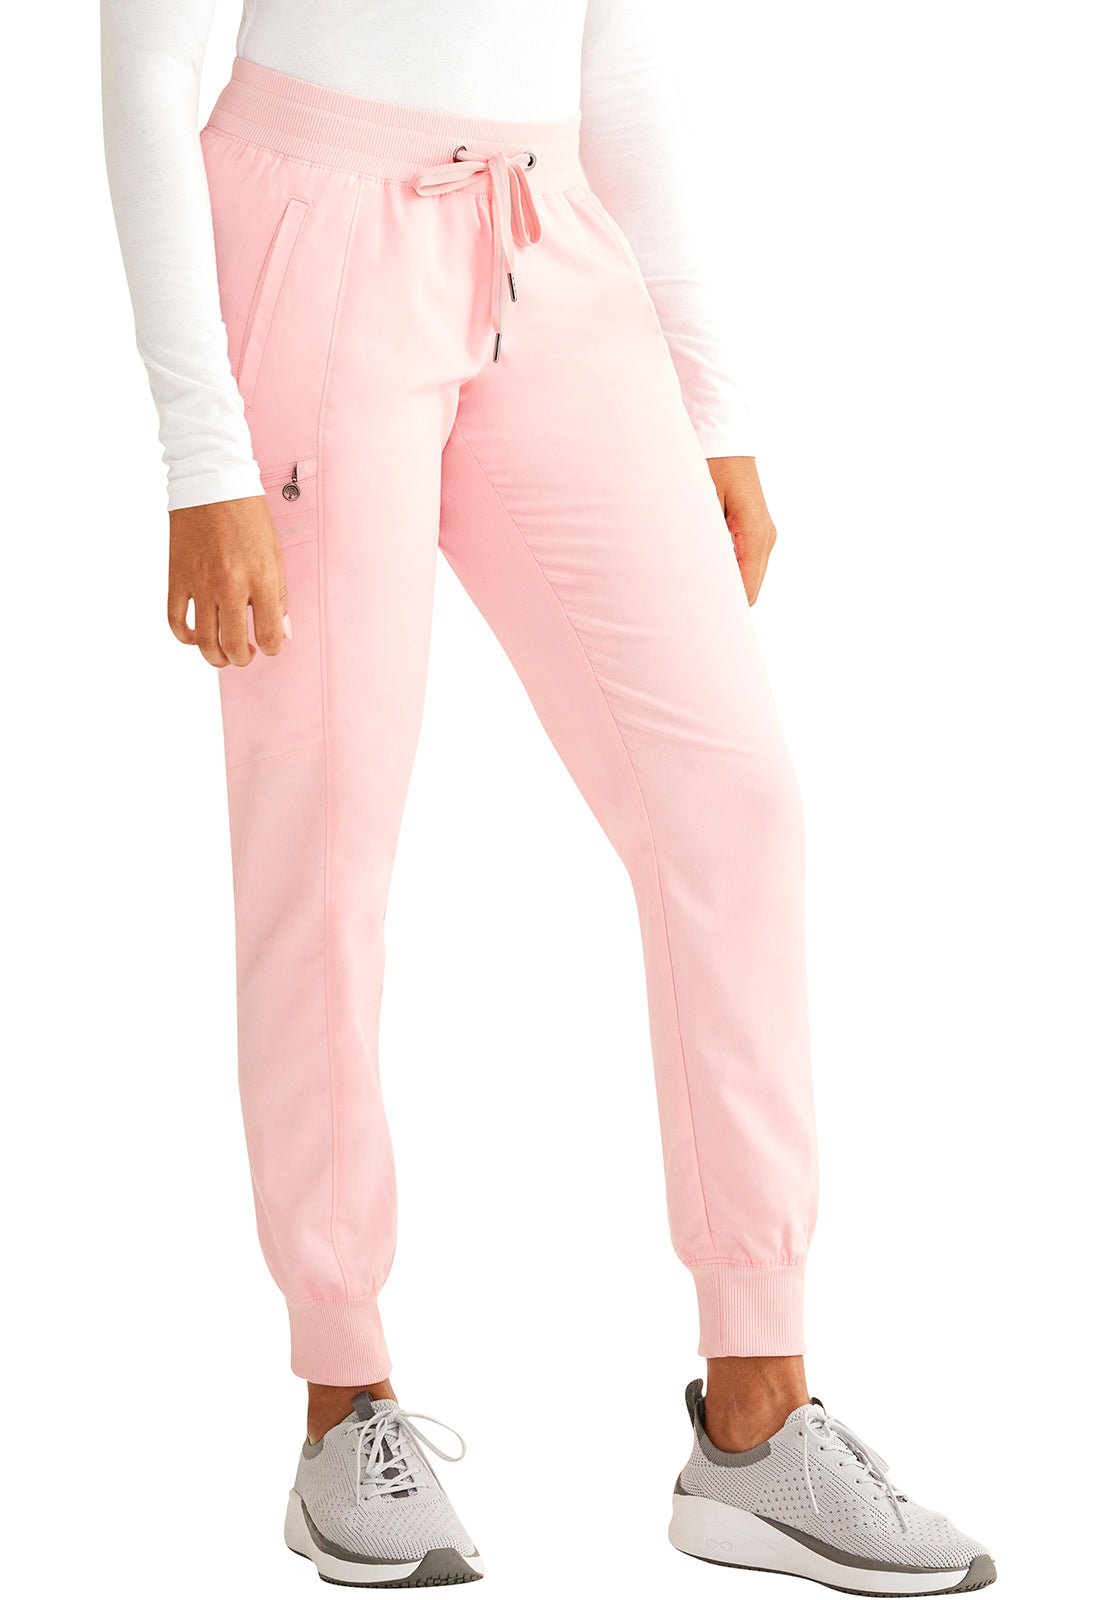 Healing Hands Toby Jogger Pant 9244 in Dried Rose, Pink Popsicle, Soft Clay